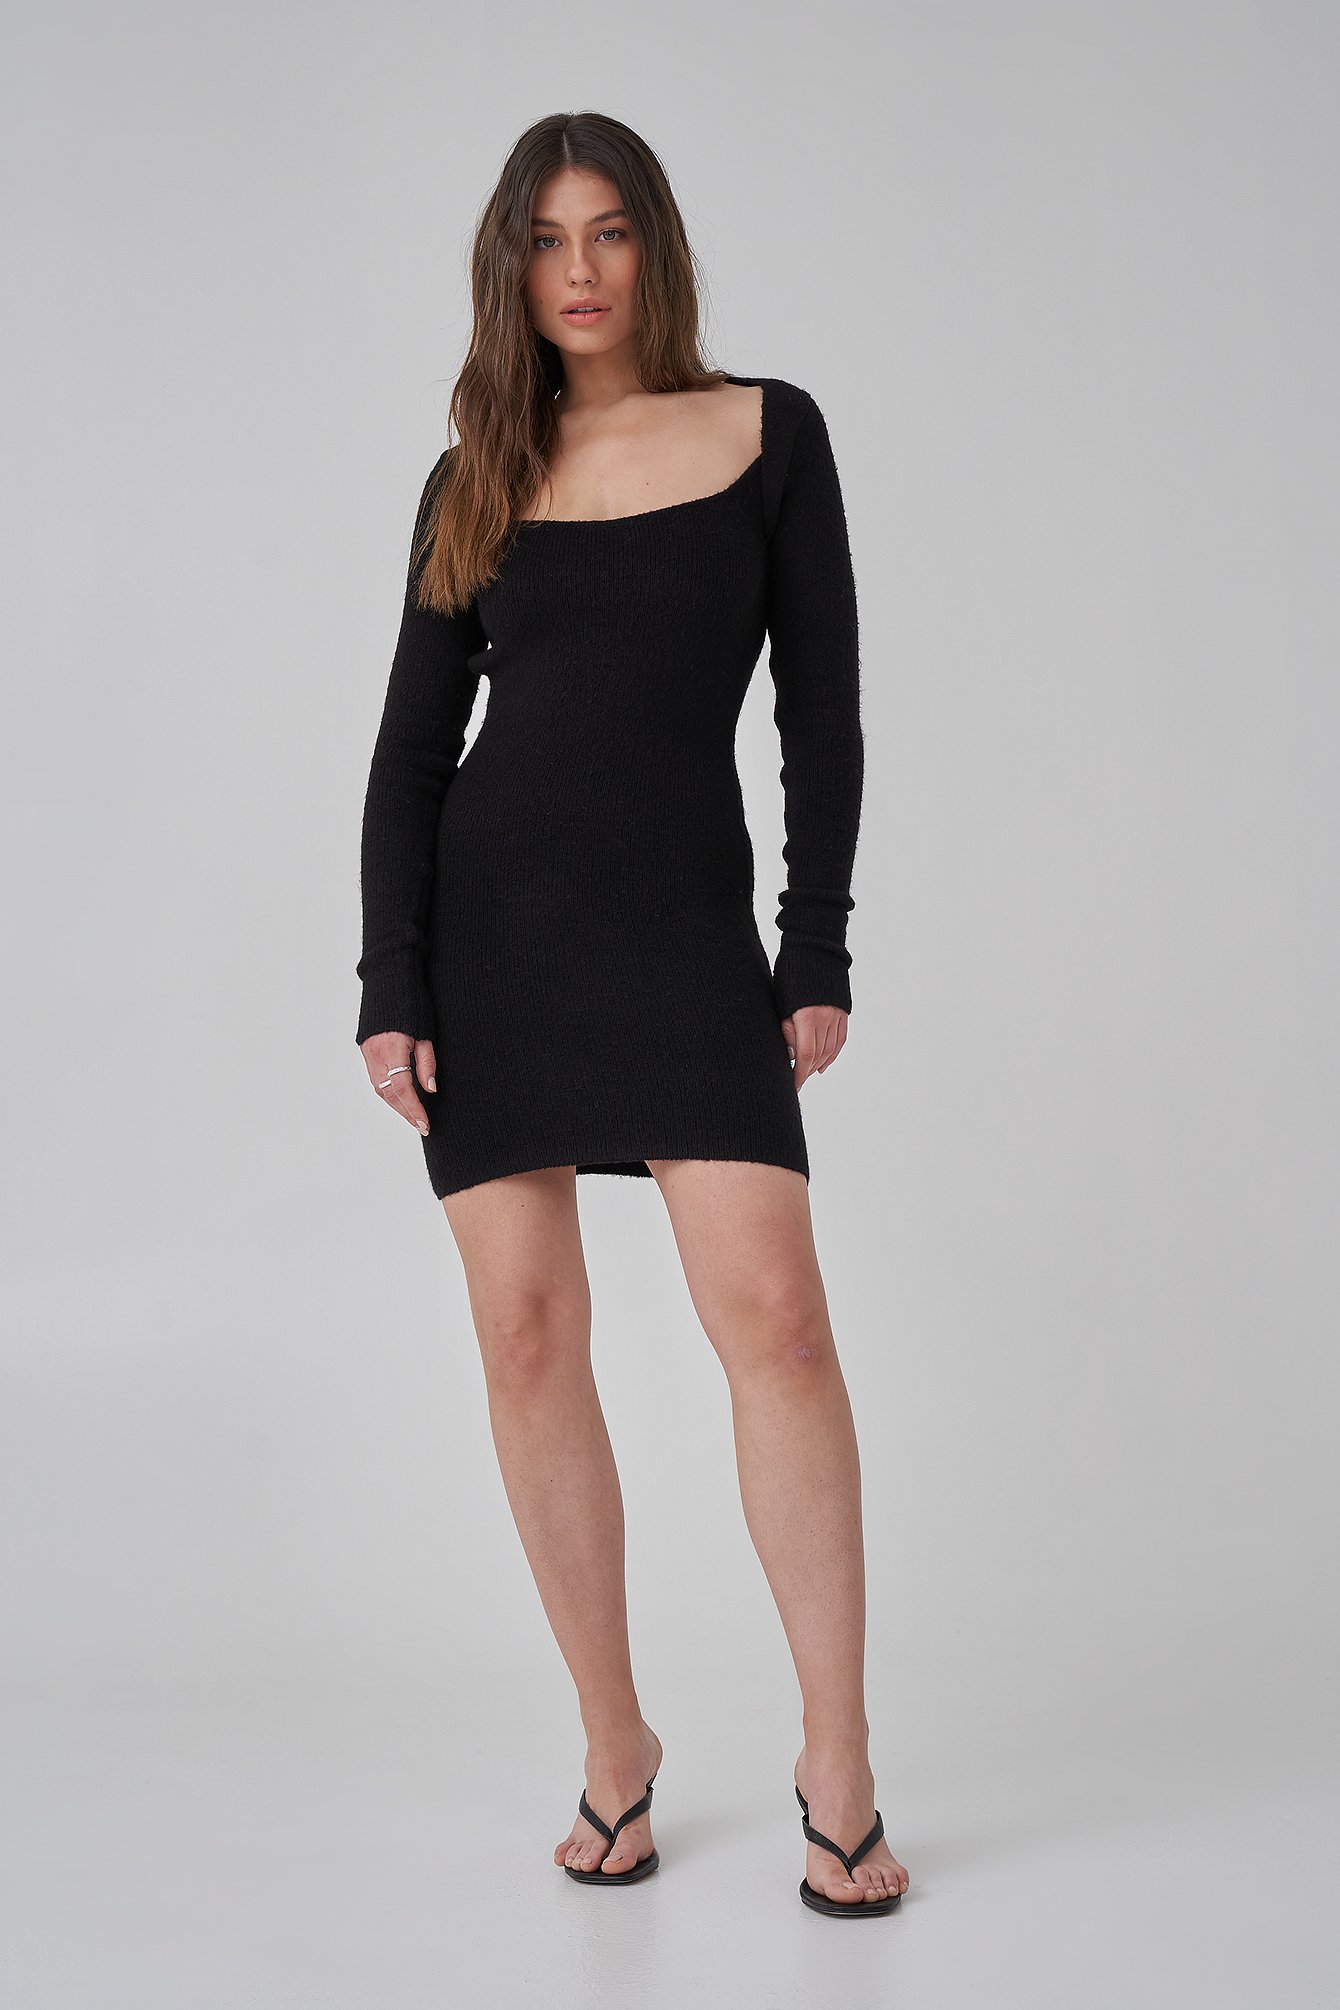 Black Cut Out Heavy Knitted Mini Dress